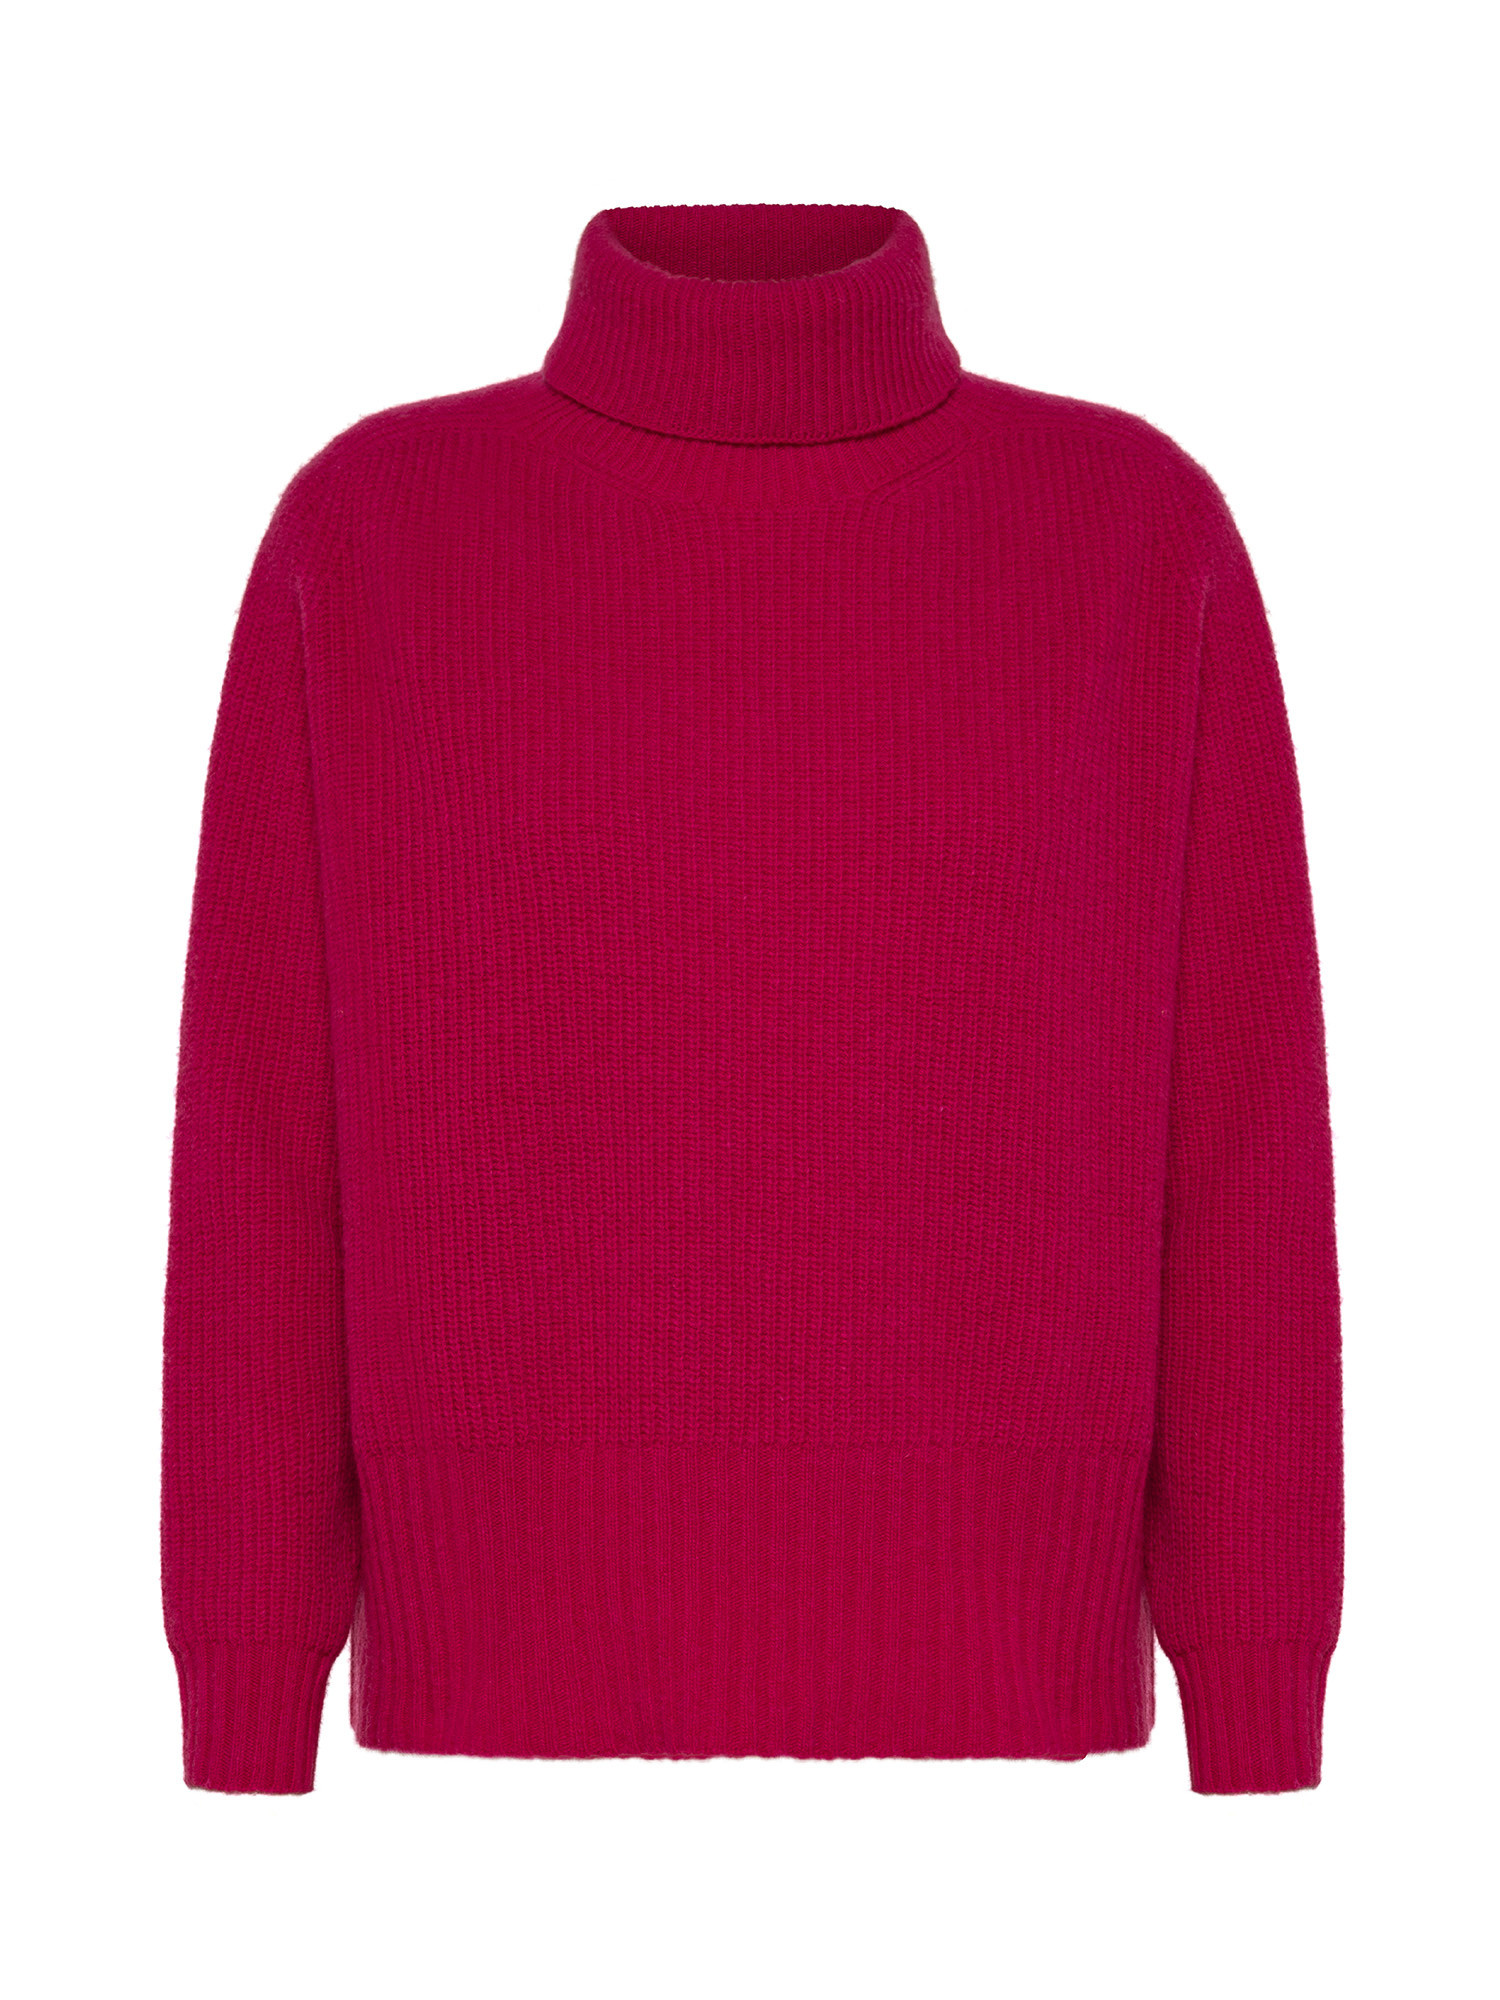 K Collection - Pullover dolcevita in lana cardata, Rosa fuxia, large image number 0